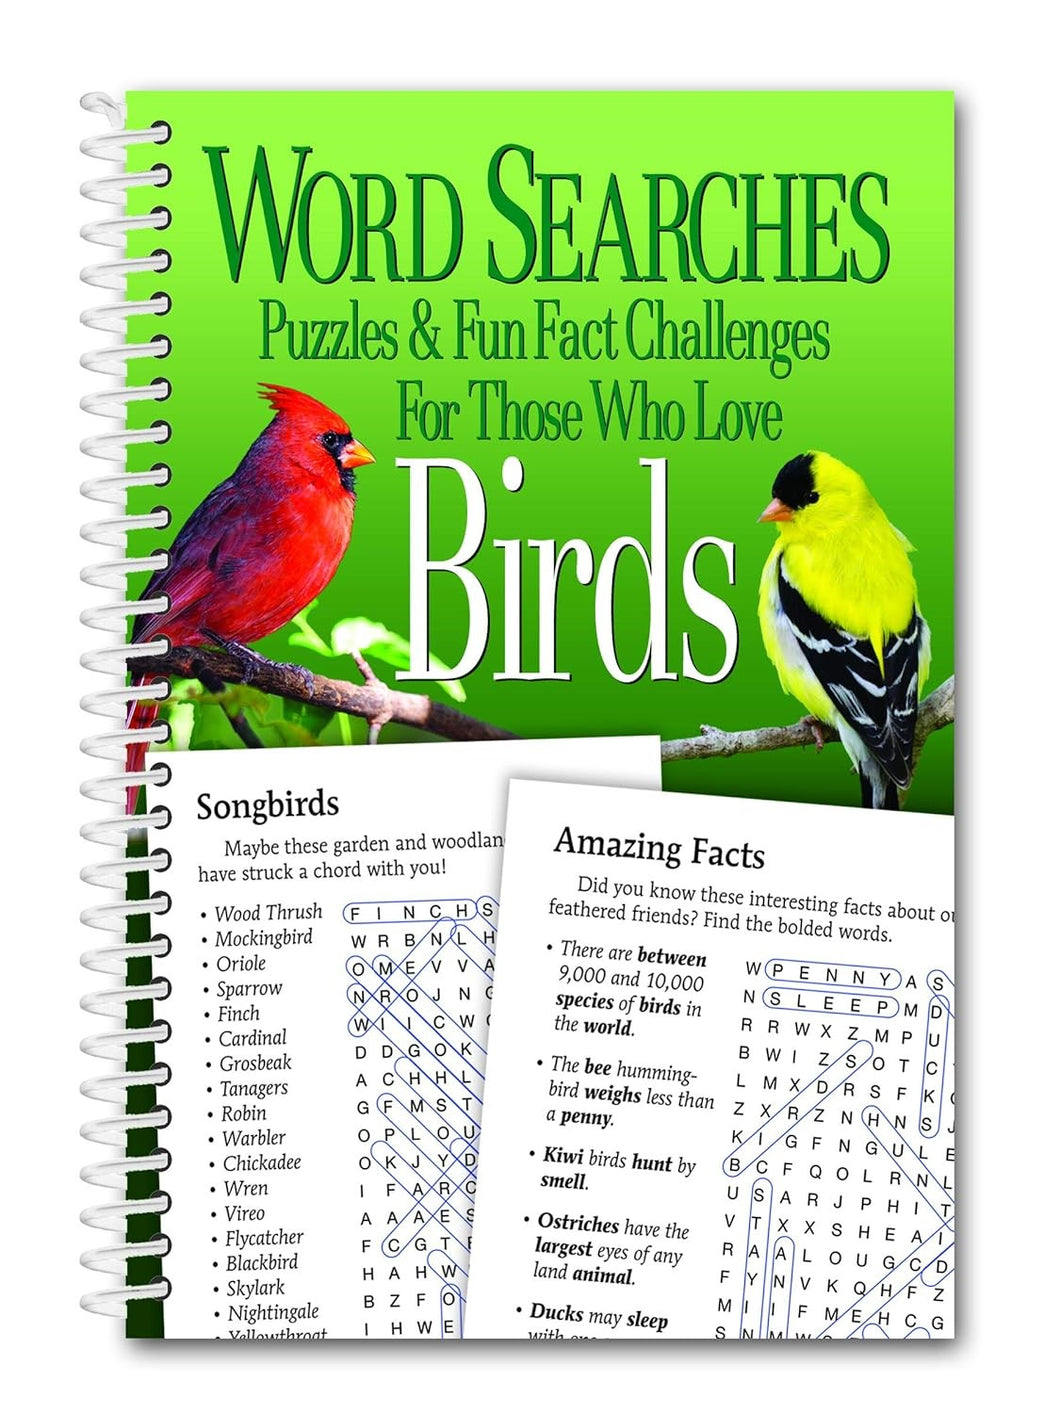 Word Searches  Puzzles And Fun Facts For Those Who Love Birds